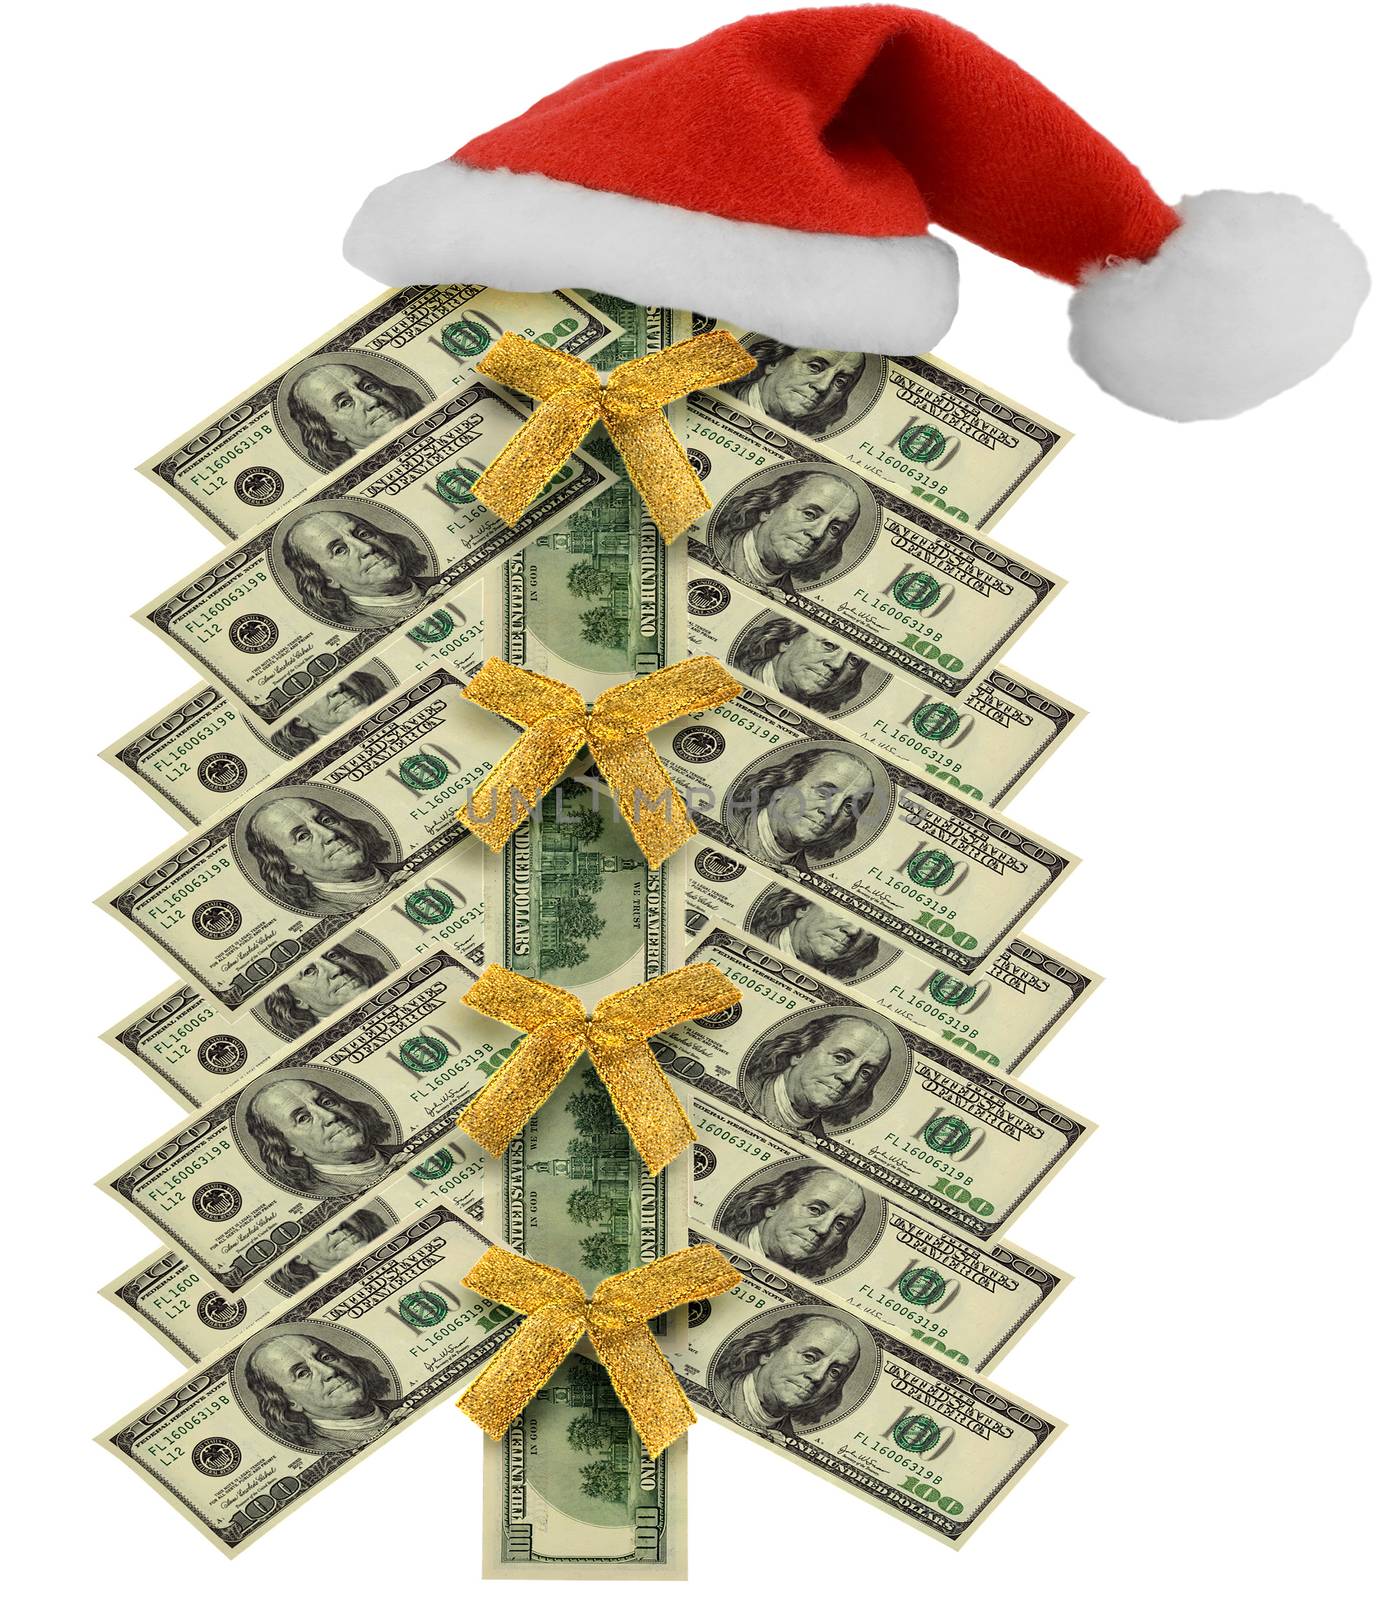 Christmas tree from different banknotes in gold Coins isolated on white background